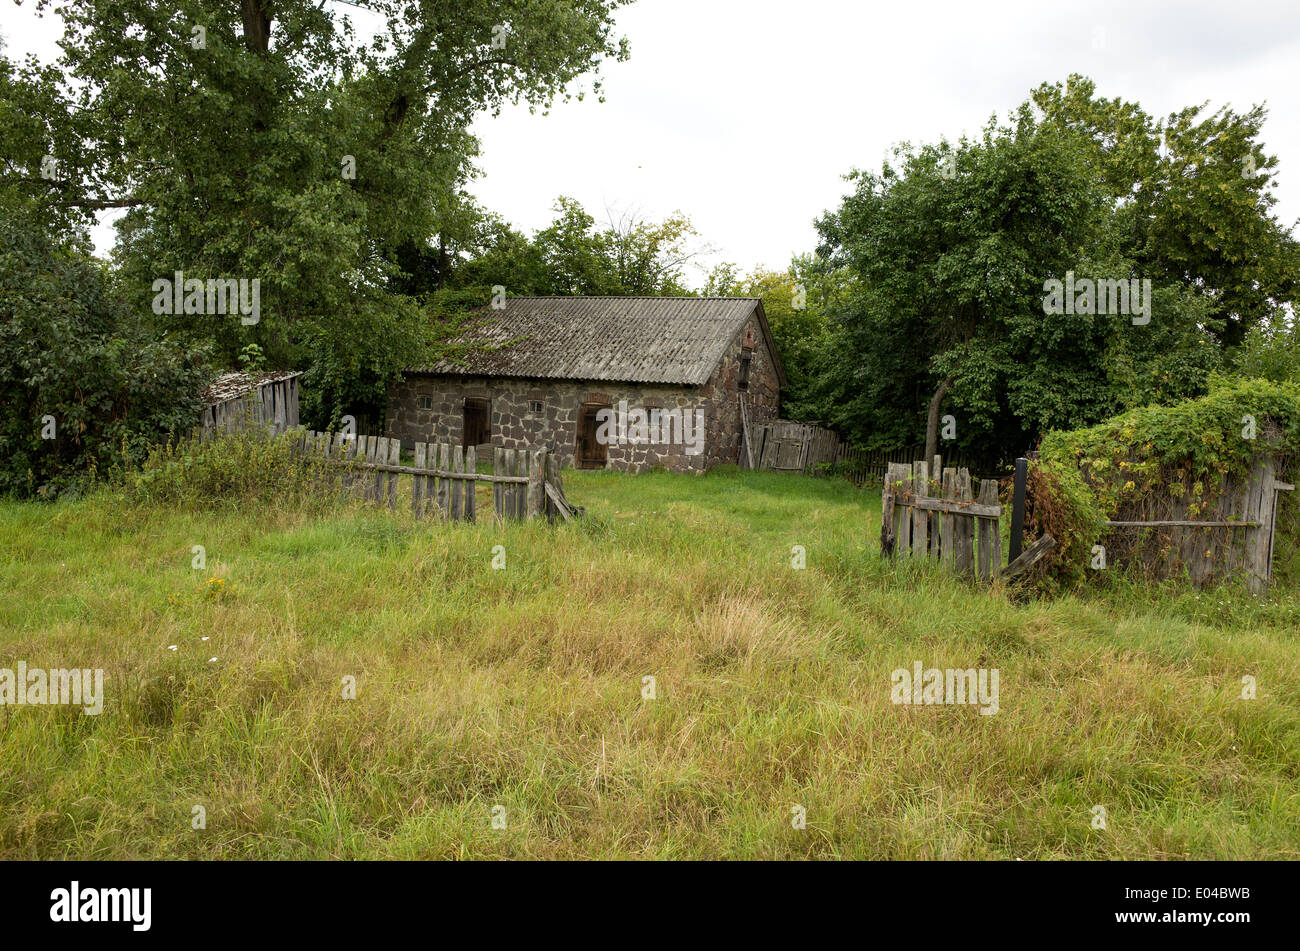 Vintage Polish farm building made of cut stone with rustic wood fence. Zawady Central Poland Stock Photo